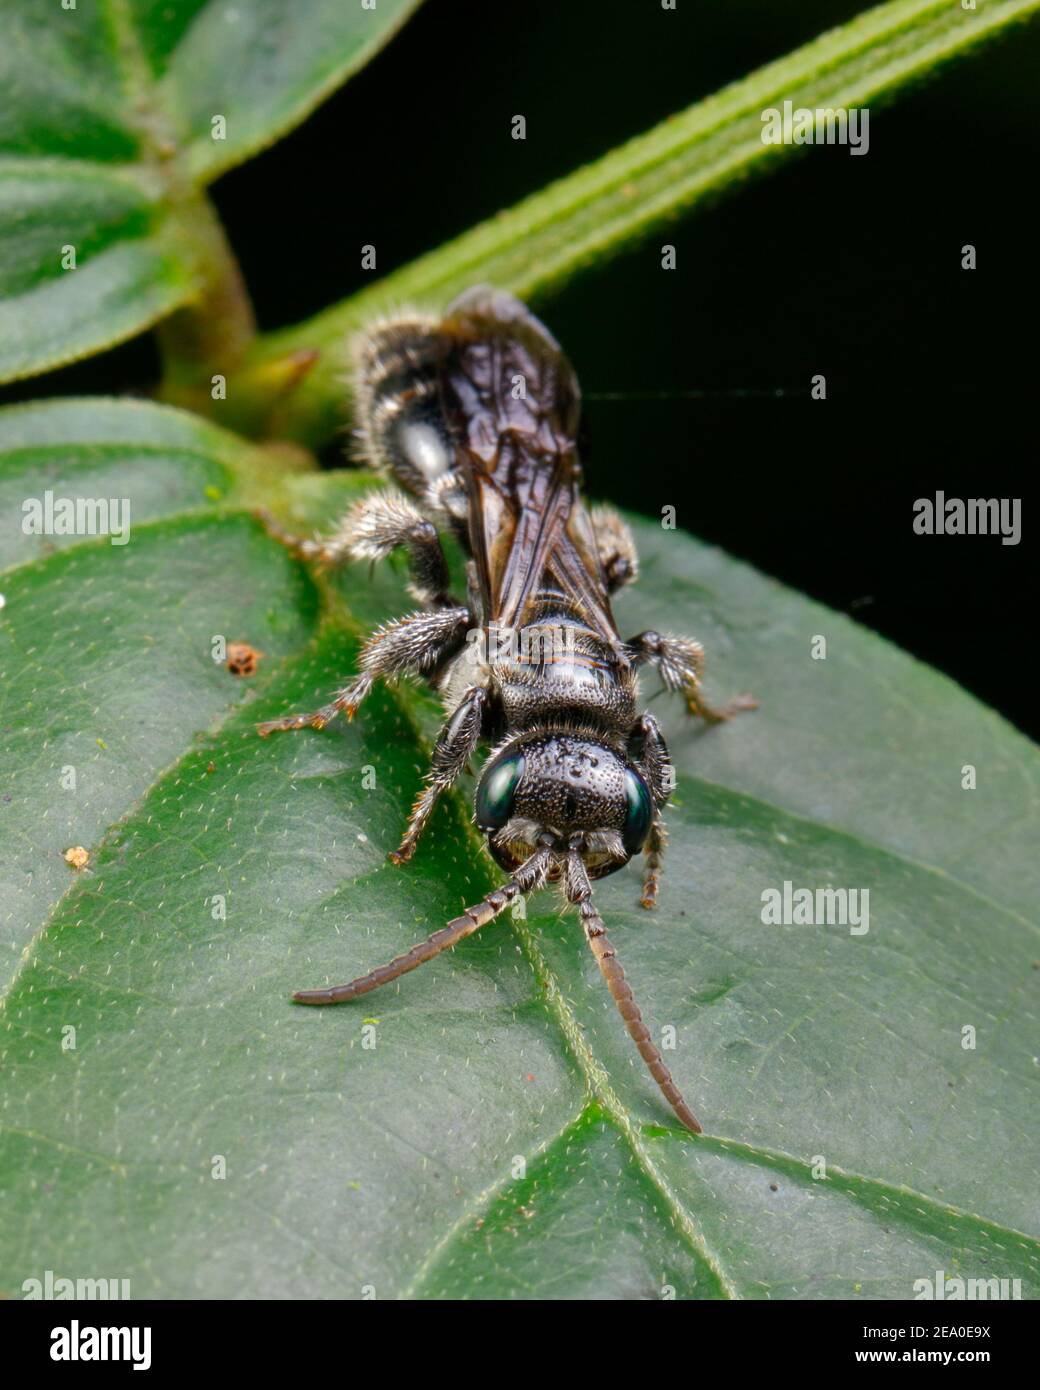 A crabronid wasp, Hymenoptera,  with green eyes crawling on a leaf. Stock Photo